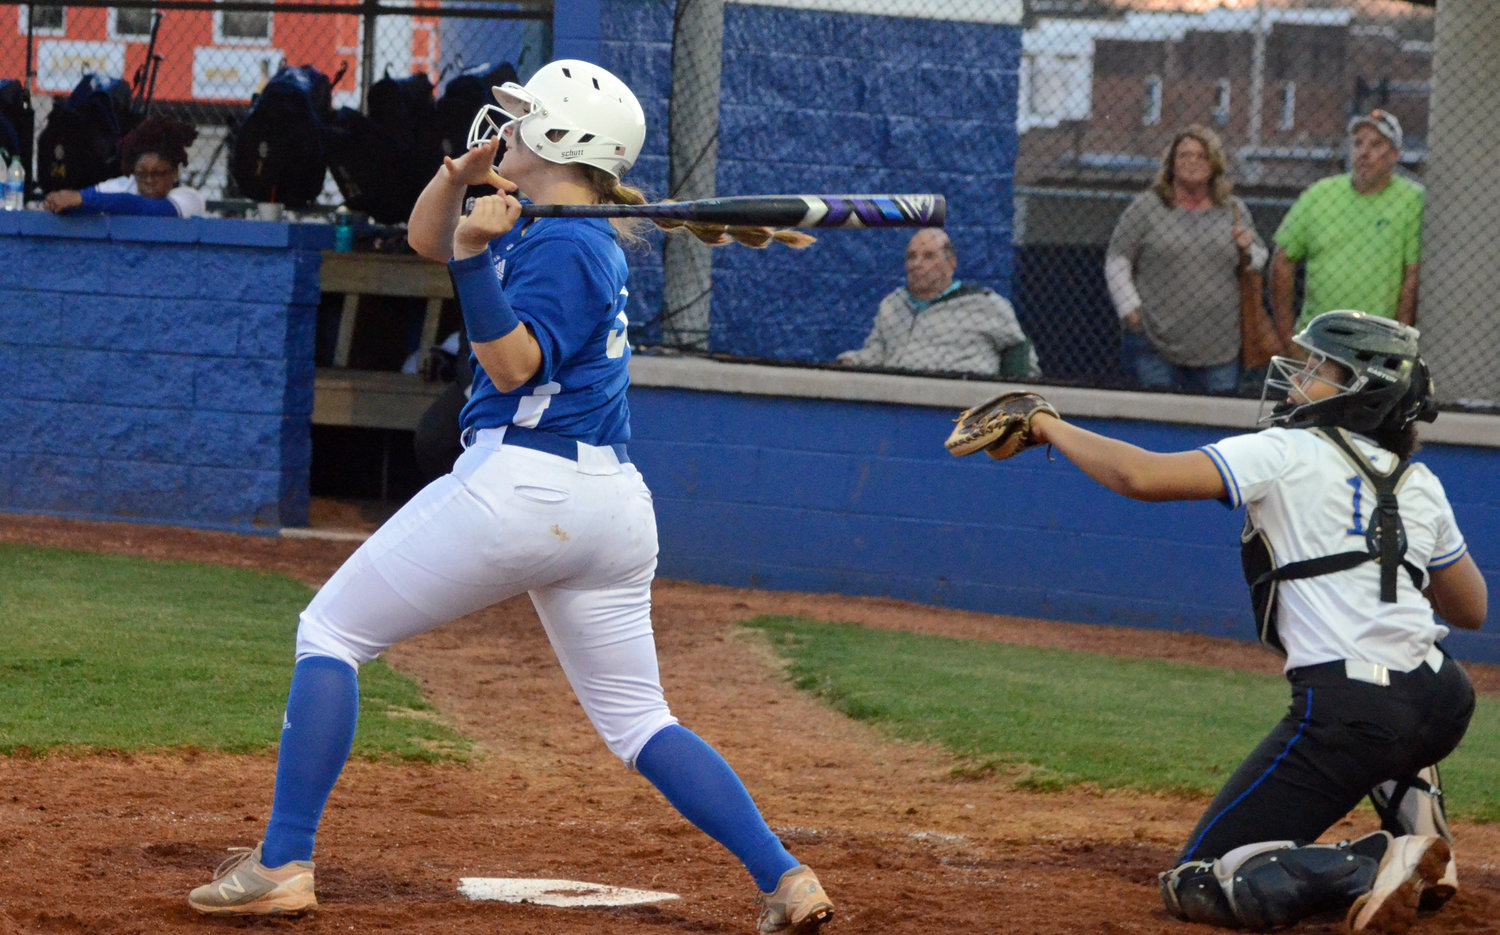 Forrest sophomore Sarah King belts a grand slam home run in the bottom of the fourth inning for the Lady Rockets, who beat Shelbyville 16-2 in a five-inning run-rule win at the Field of Dreams in Chapel Hill Thursday night.